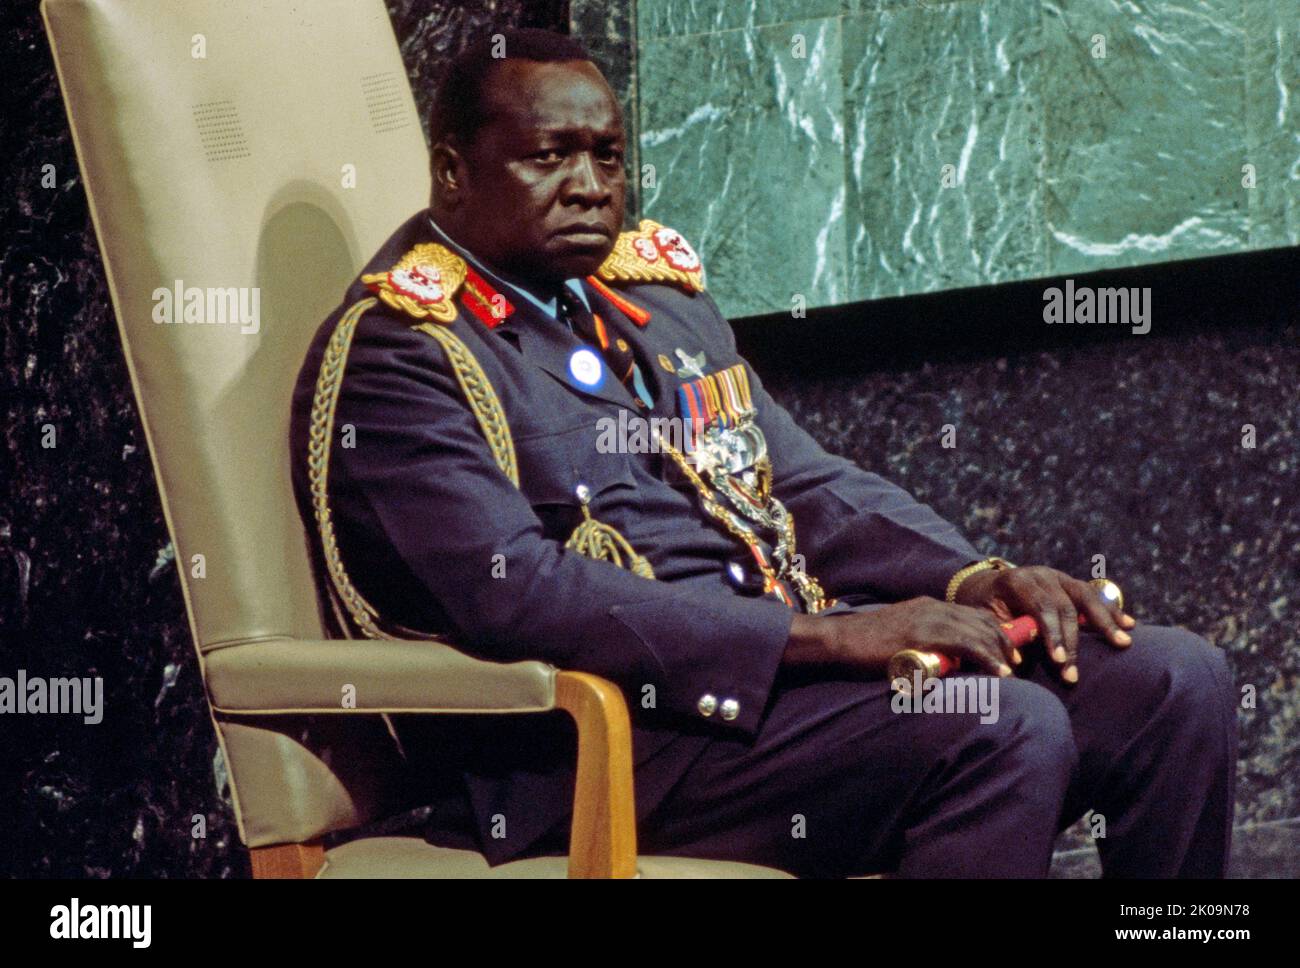 Idi Amin Dada Oumee (1925 - 2003) was a Ugandan military officer who served as the third president of Uganda from 1971 to 1979 and de facto military dictator. He is considered one of the most brutal despots in world history. Stock Photo